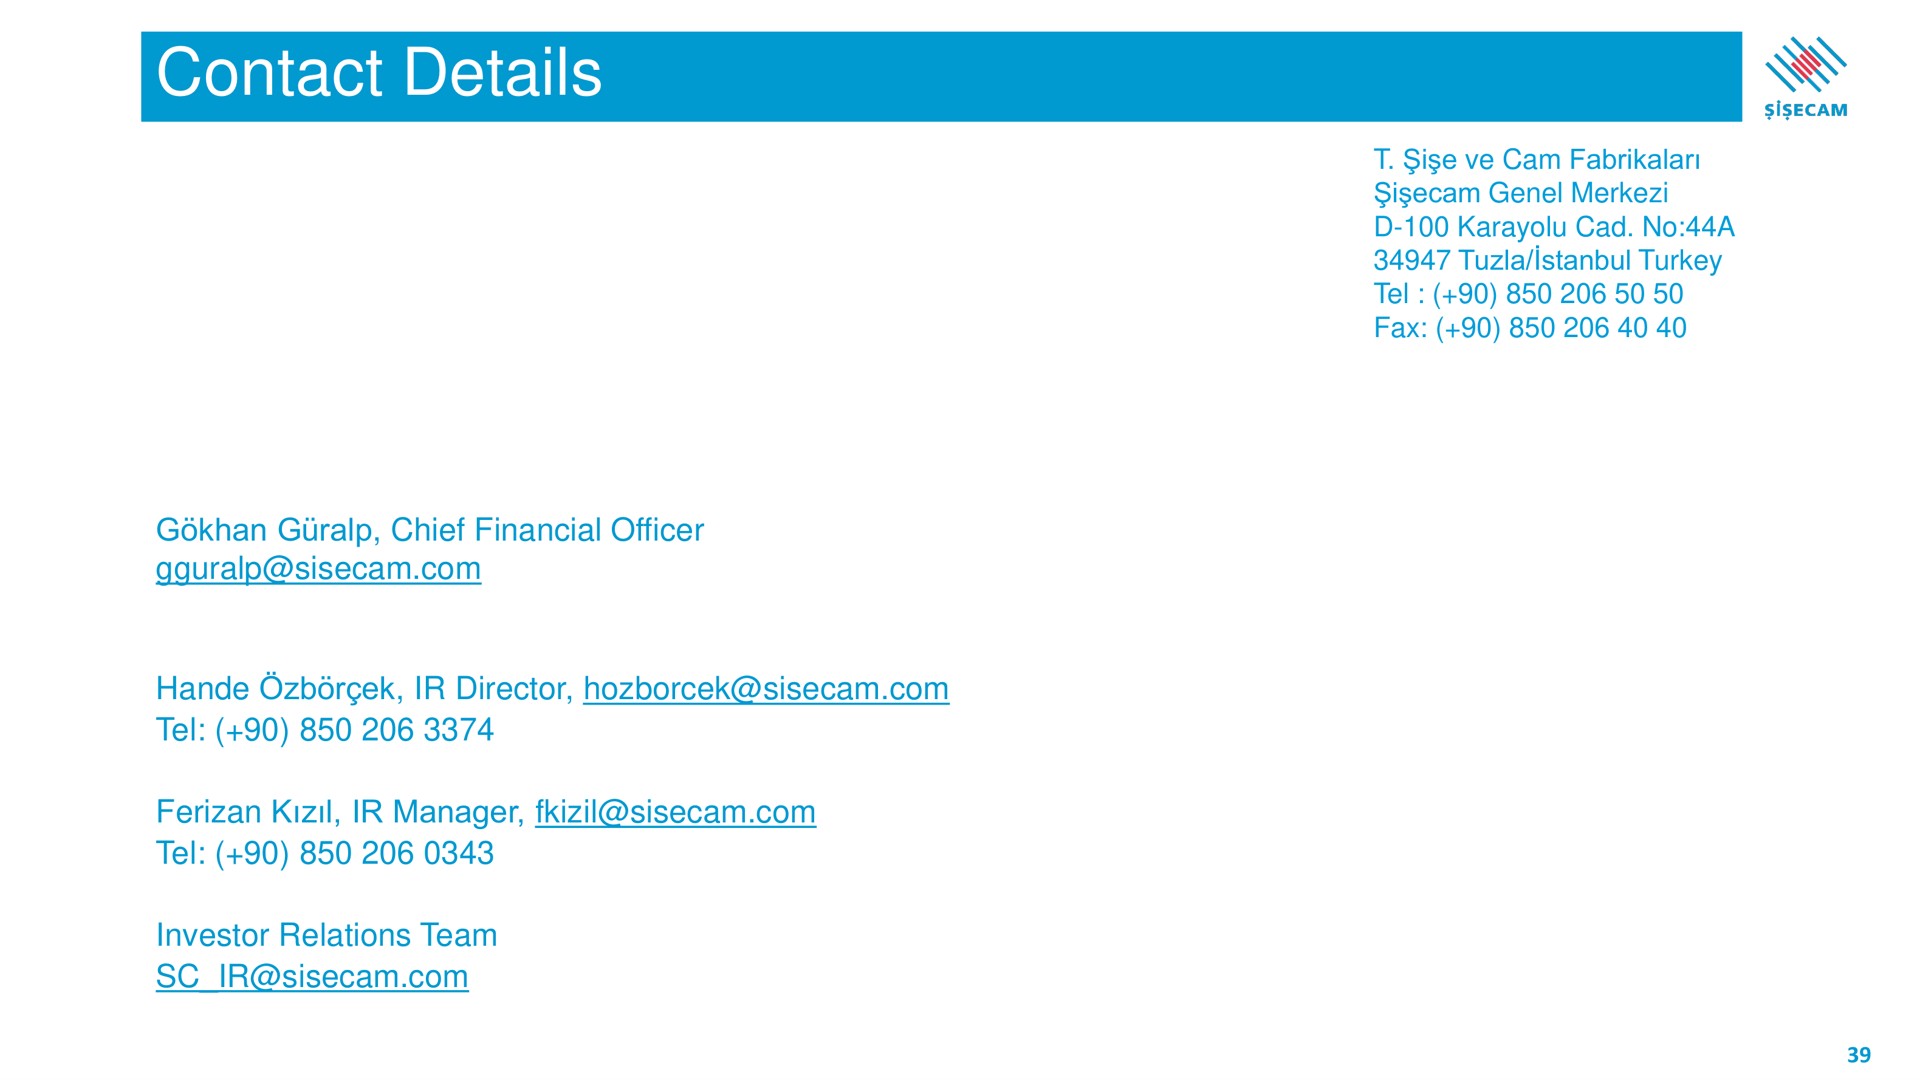 contact details | Sisecam Resources